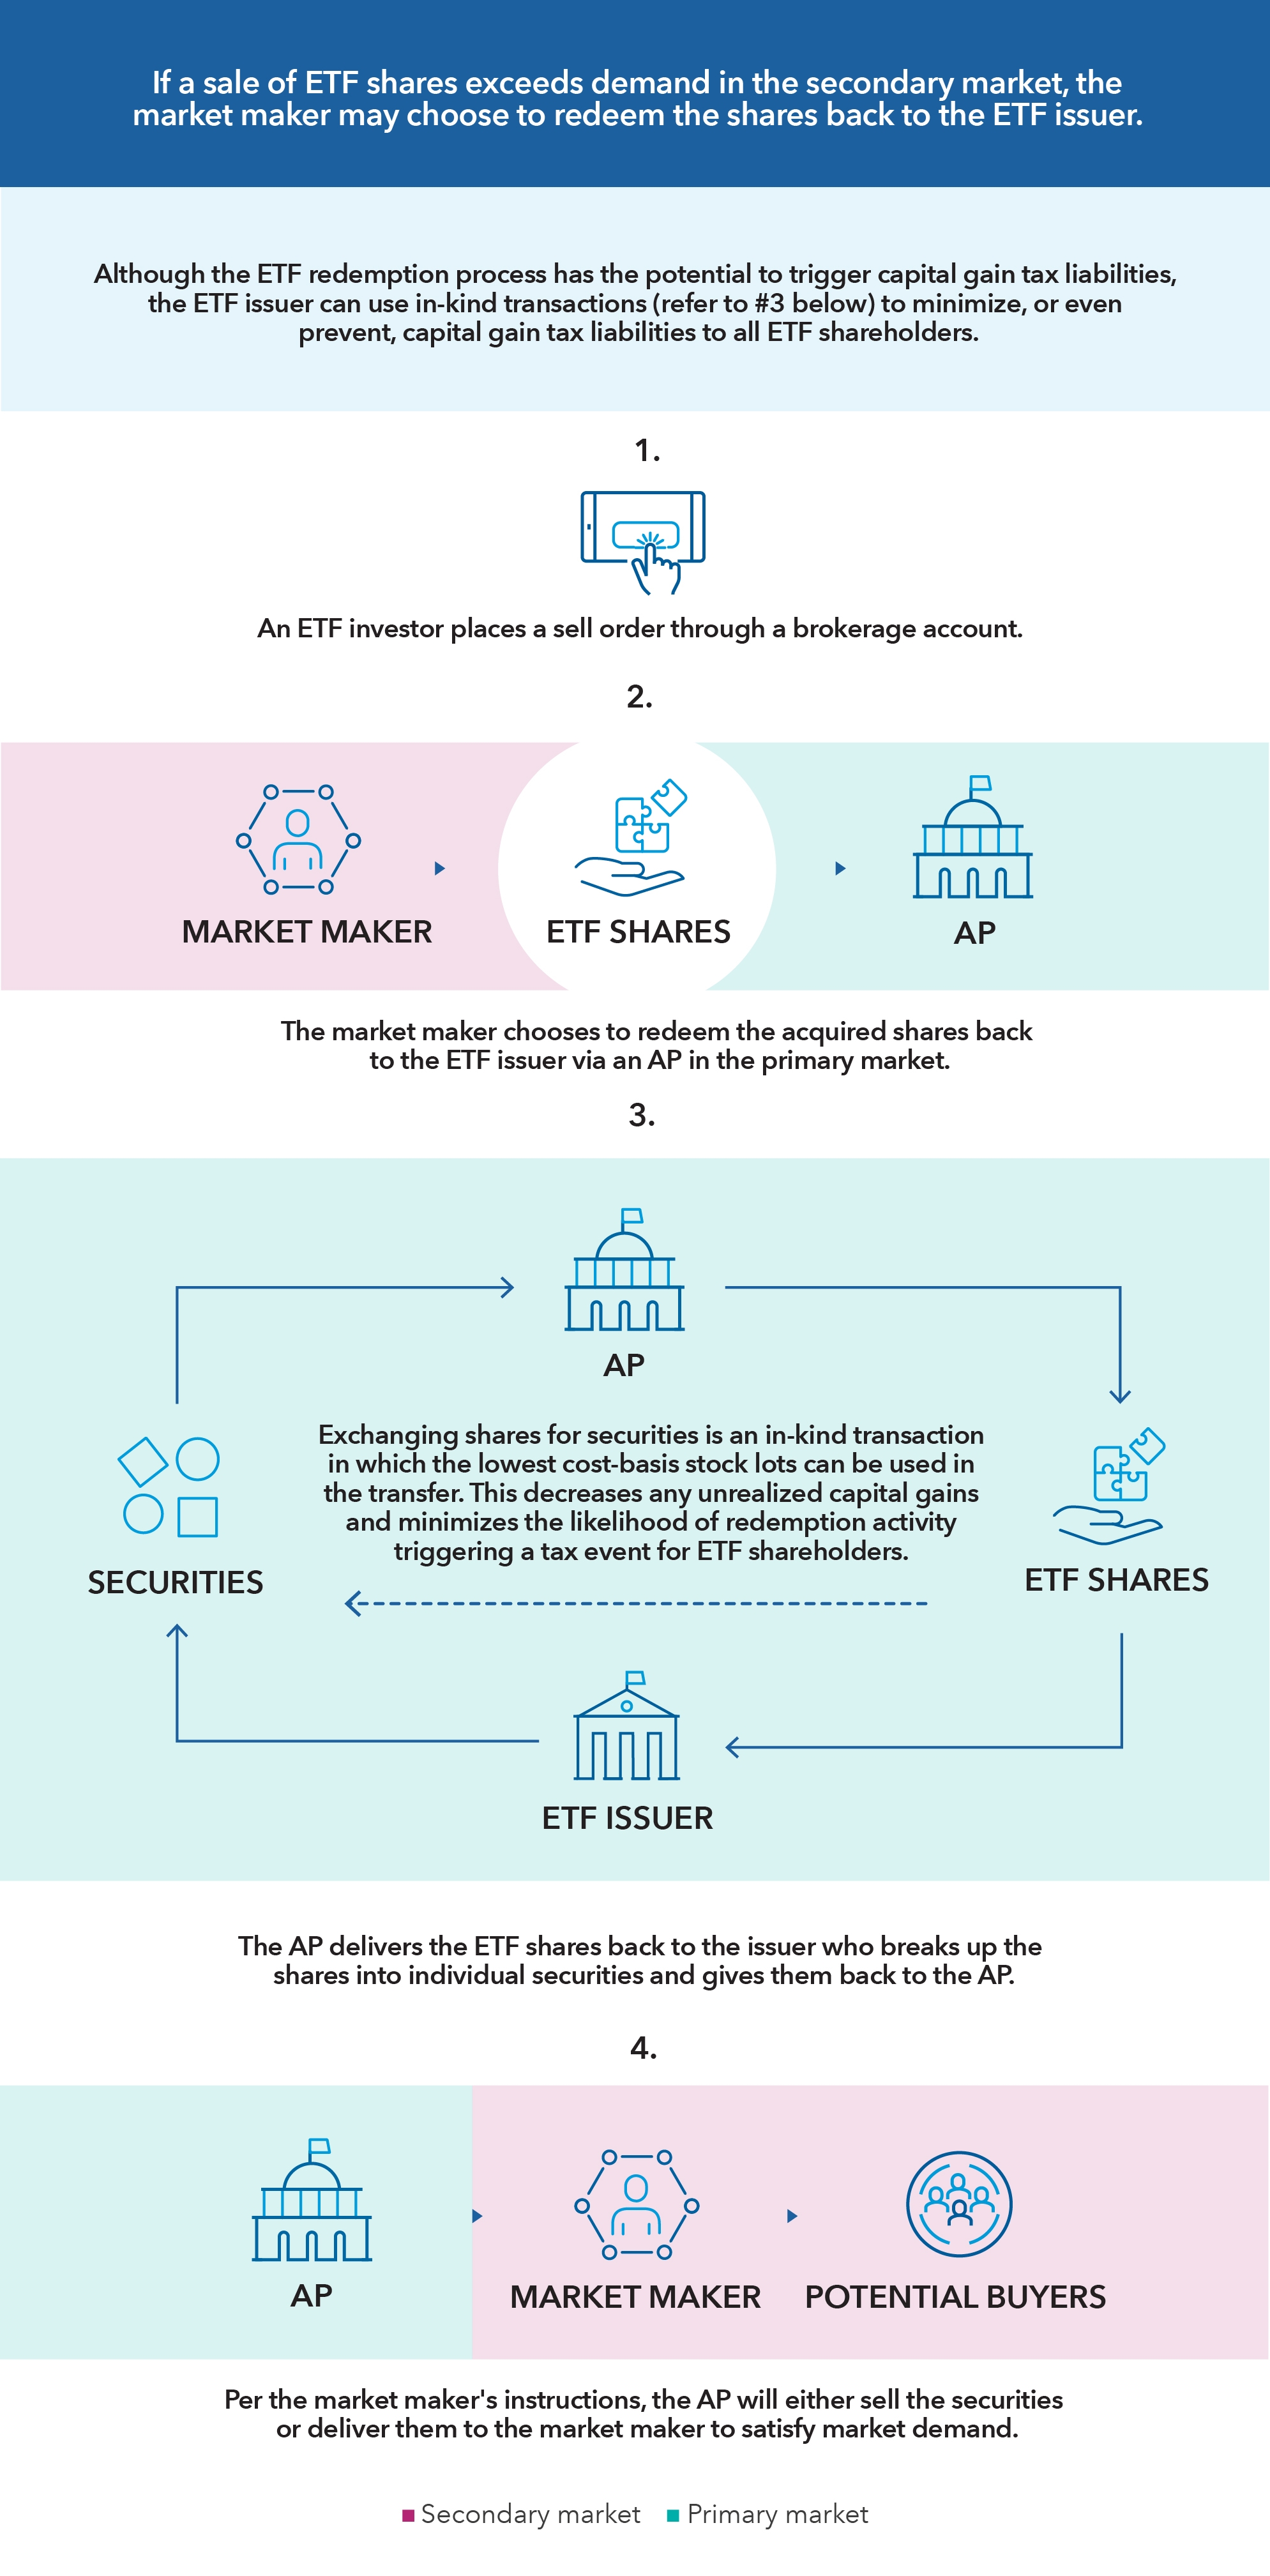 A flow chart showing the ETF redemption process. If a sale of ETF shares exceeds demand in the secondary market, the market maker may choose to redeem the shares back to the ETF issuer. Although the ETF redemption process has the potential to trigger capital gain tax liabilities, the ETF issuer can use in-kind transactions to minimize, or even prevent, capital gain tax liabilities to all ETF shareholders. The process starts with an ETF investor placing a sell order through a brokerage account. The market maker chooses to redeem the acquired shares back to the ETF issuer via an authorized participant (also known as an “AP) in the primary market. Next, the AP delivers the ETF shares back to the issuer who breaks up the shares into individual securities and gives them back to the AP. Exchanging shares for securities is an in-kind transaction in which the lowest cost-basis stock lots can be used in the transfer. This decreases any unrealized capital gains and minimizes the likelihood of redemption activity triggering a tax event for ETF shareholders. In the final step of the process, the AP will follow the market maker’s instructions to either sell the securities or deliver them to the market maker to satisfy market demand. 